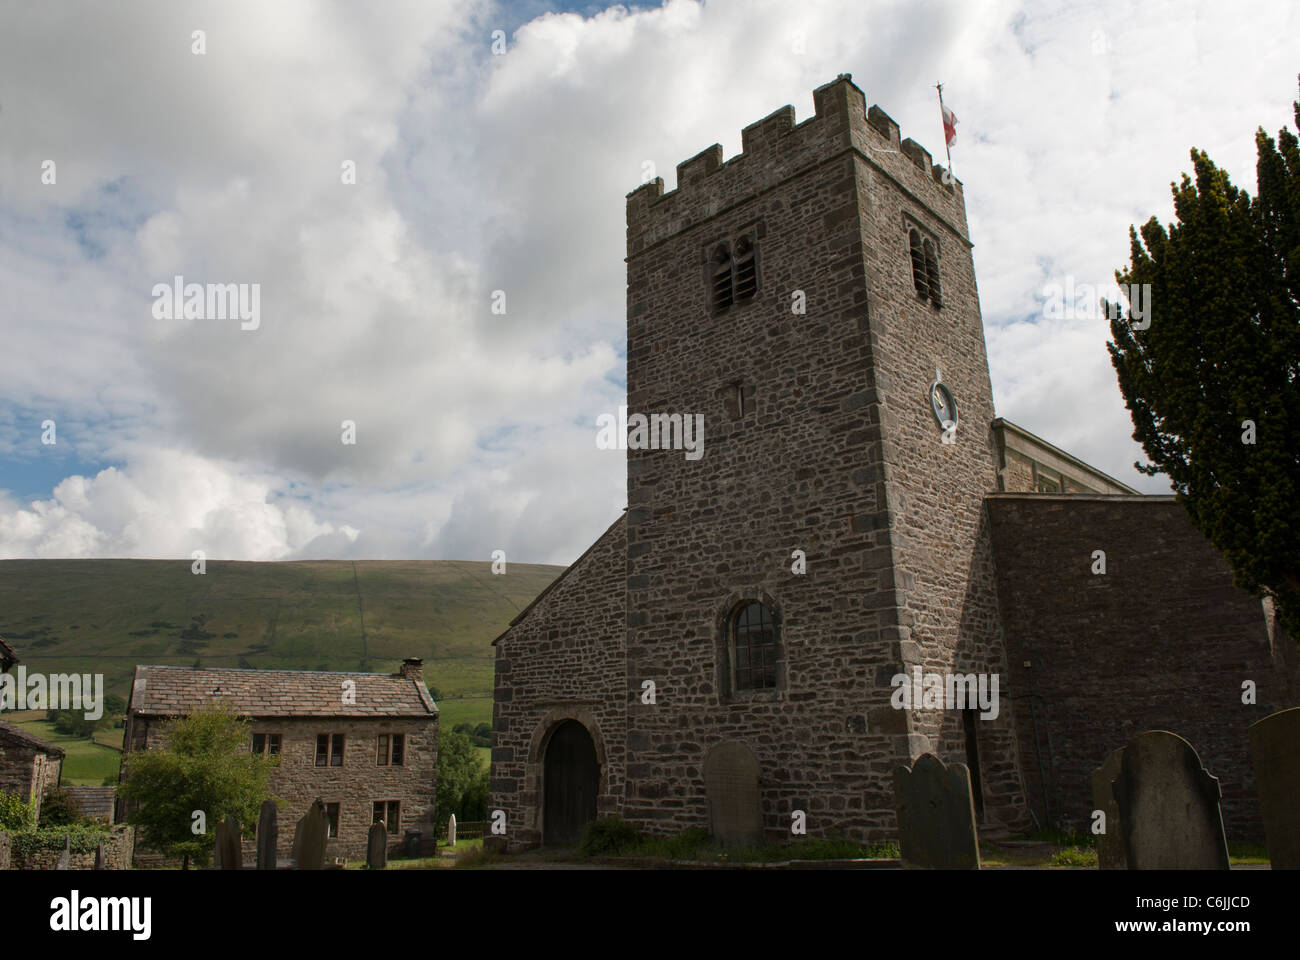 Pfarrei St.-Andreas-Kirche, Dent, Dentdale, North Yorkshire, England. Stockfoto